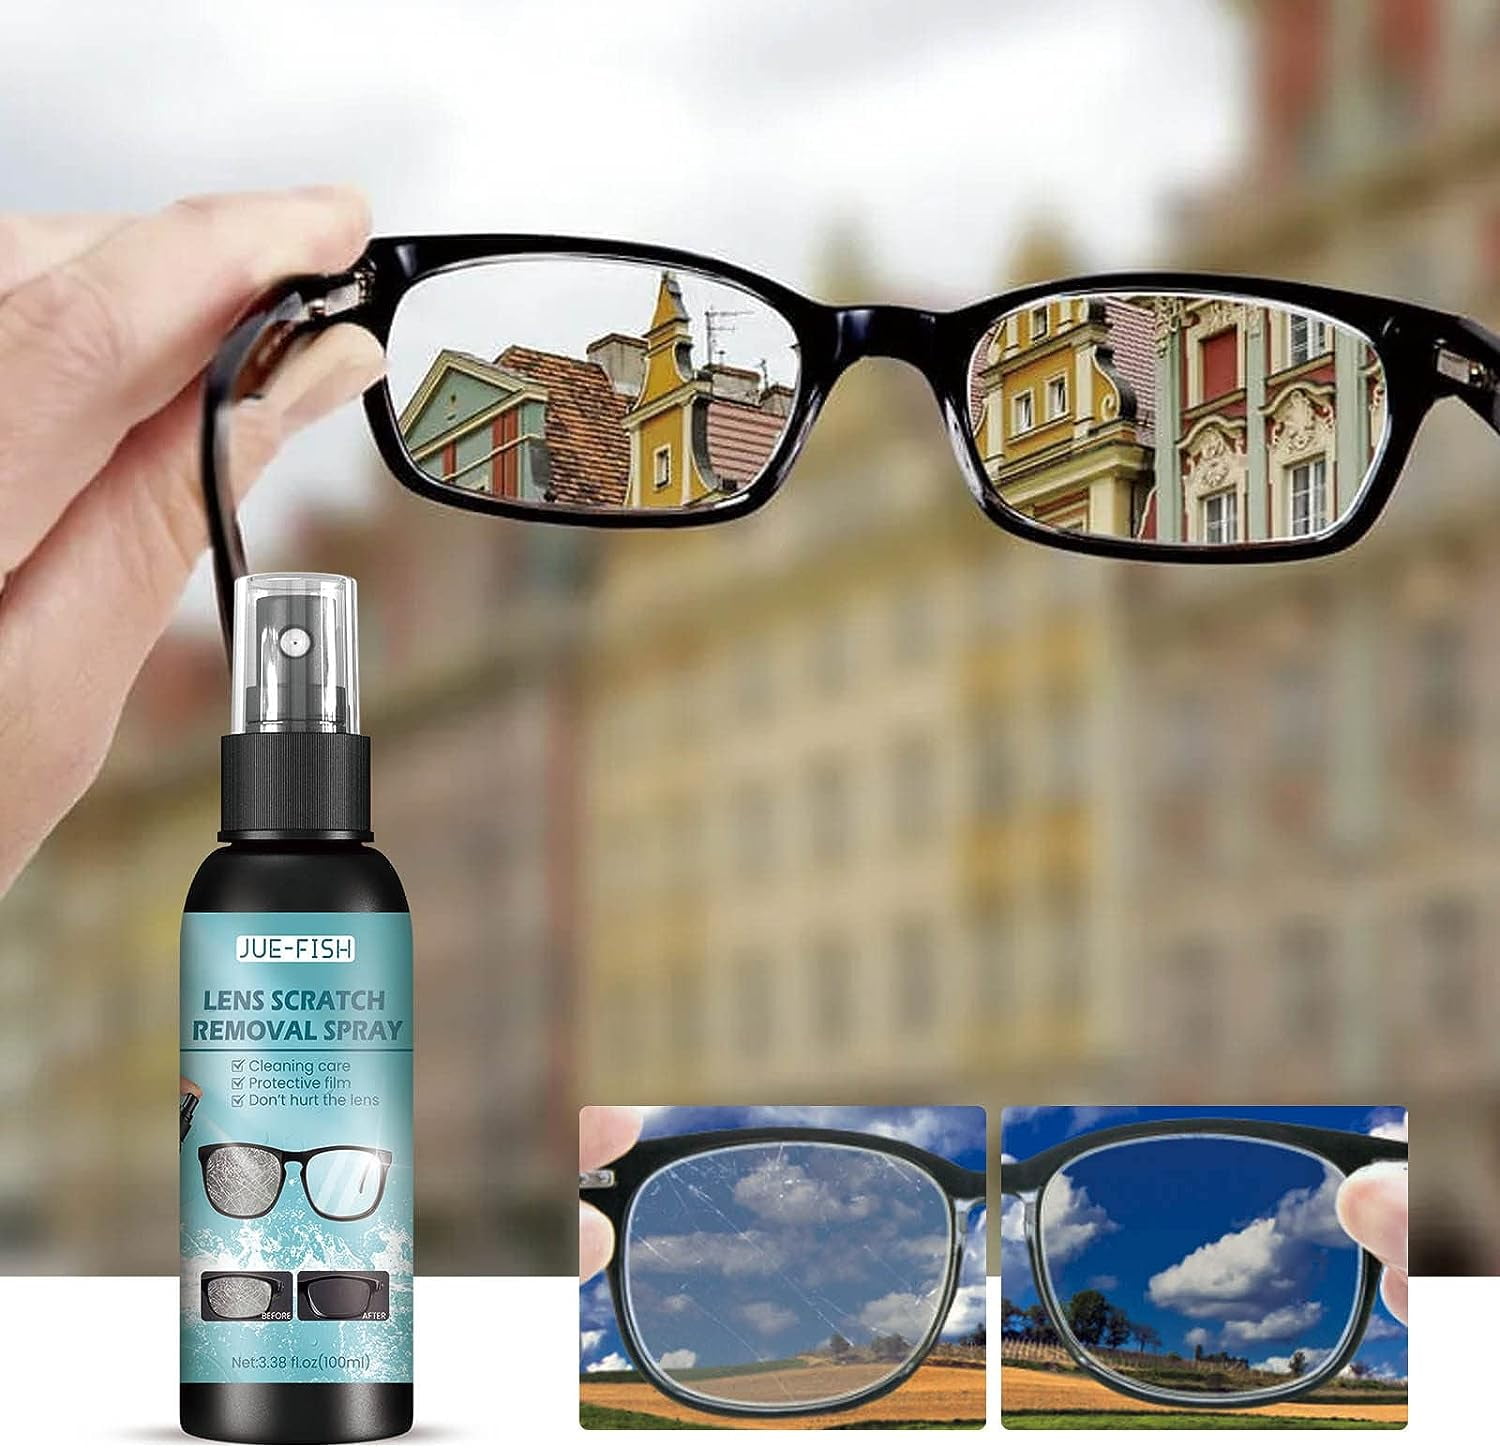  Lens Scratch Removal Spray, Eye Glass Cleaner for Glasses and  Sunglasses, Eyeglass Windshield Glass Repair Liquid, Eyeglass Glass Scratch  Repair Solution, Lens Scratch Remover 100ml (2PCS) : Health & Household